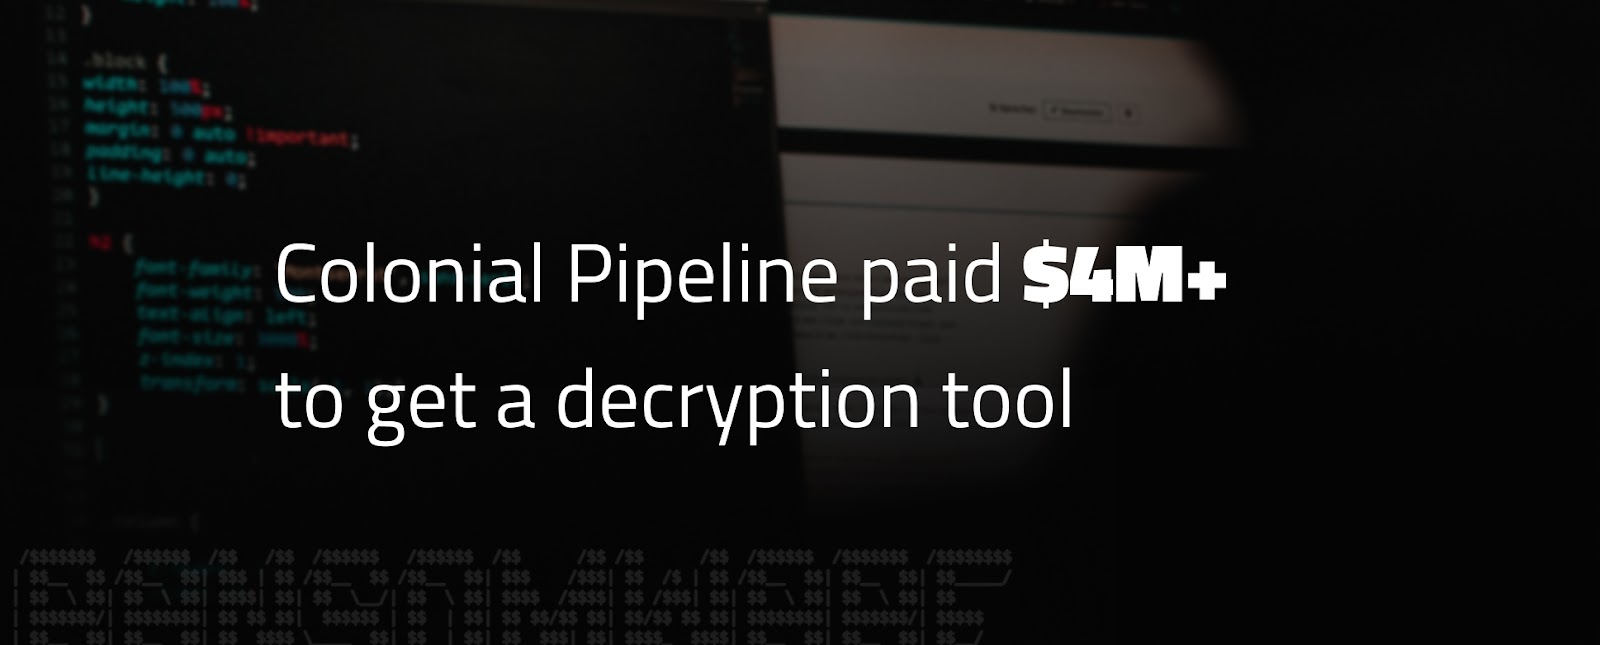 stock background with copy of the colonial pipeline payment to get ransomware decryption tool